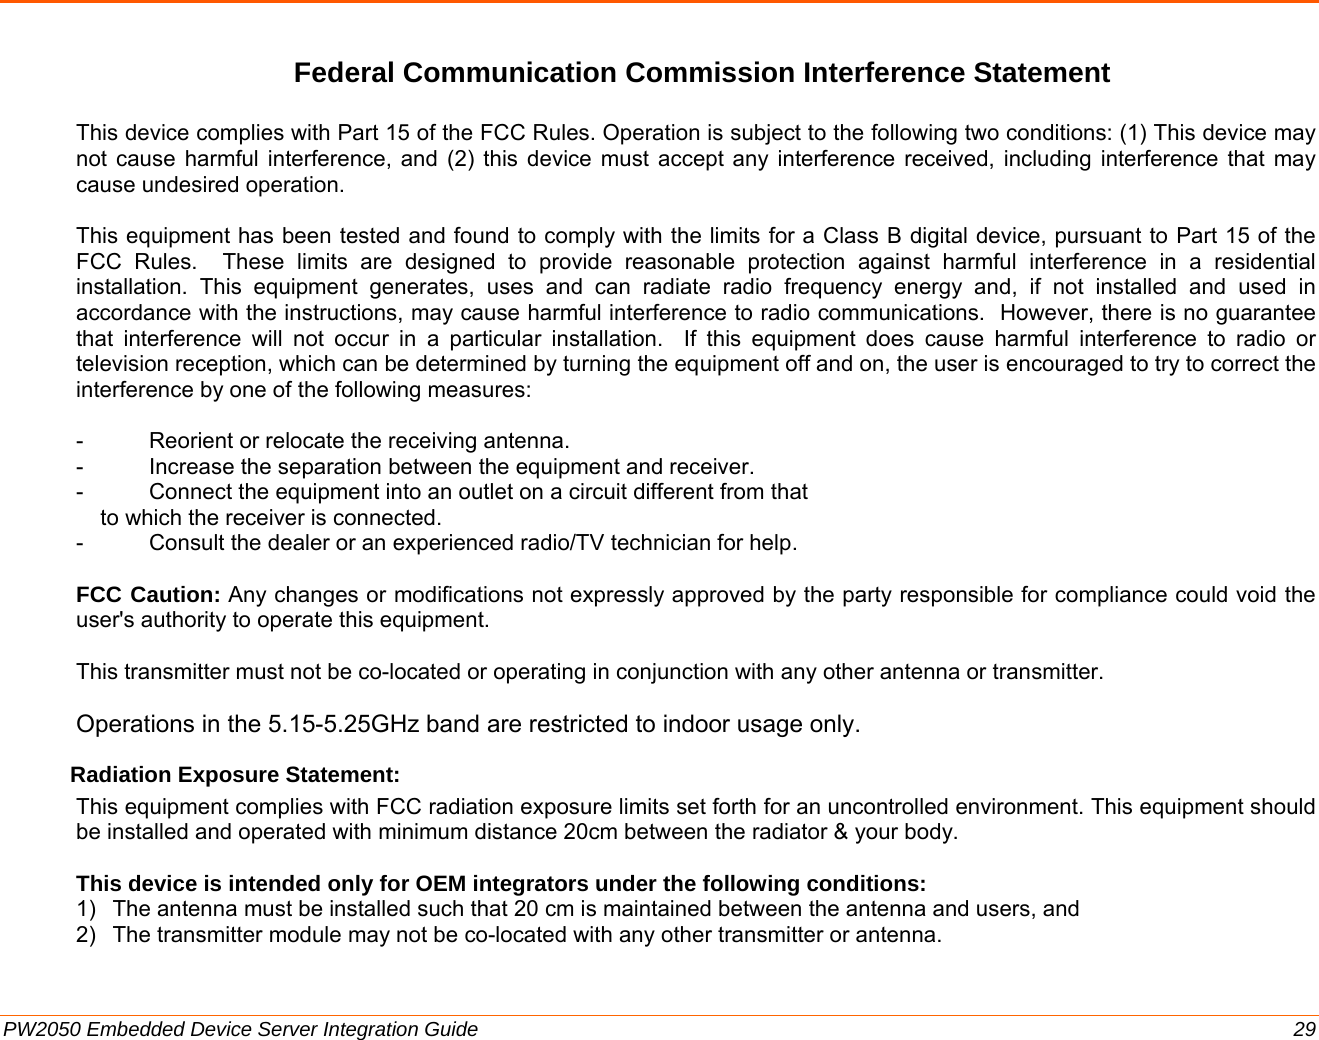  PW2050 Embedded Device Server Integration Guide  29 Federal Communication Commission Interference Statement  This device complies with Part 15 of the FCC Rules. Operation is subject to the following two conditions: (1) This device may not cause harmful interference, and (2) this device must accept any interference received, including interference that may cause undesired operation.  This equipment has been tested and found to comply with the limits for a Class B digital device, pursuant to Part 15 of the FCC Rules.  These limits are designed to provide reasonable protection against harmful interference in a residential installation. This equipment generates, uses and can radiate radio frequency energy and, if not installed and used in accordance with the instructions, may cause harmful interference to radio communications.  However, there is no guarantee that interference will not occur in a particular installation.  If this equipment does cause harmful interference to radio or television reception, which can be determined by turning the equipment off and on, the user is encouraged to try to correct the interference by one of the following measures:  -  Reorient or relocate the receiving antenna. -  Increase the separation between the equipment and receiver. -  Connect the equipment into an outlet on a circuit different from that to which the receiver is connected. -  Consult the dealer or an experienced radio/TV technician for help.  FCC Caution: Any changes or modifications not expressly approved by the party responsible for compliance could void the user&apos;s authority to operate this equipment.  This transmitter must not be co-located or operating in conjunction with any other antenna or transmitter.  Operations in the 5.15-5.25GHz band are restricted to indoor usage only. Radiation Exposure Statement: This equipment complies with FCC radiation exposure limits set forth for an uncontrolled environment. This equipment should be installed and operated with minimum distance 20cm between the radiator &amp; your body.  This device is intended only for OEM integrators under the following conditions: 1)  The antenna must be installed such that 20 cm is maintained between the antenna and users, and  2)  The transmitter module may not be co-located with any other transmitter or antenna.  